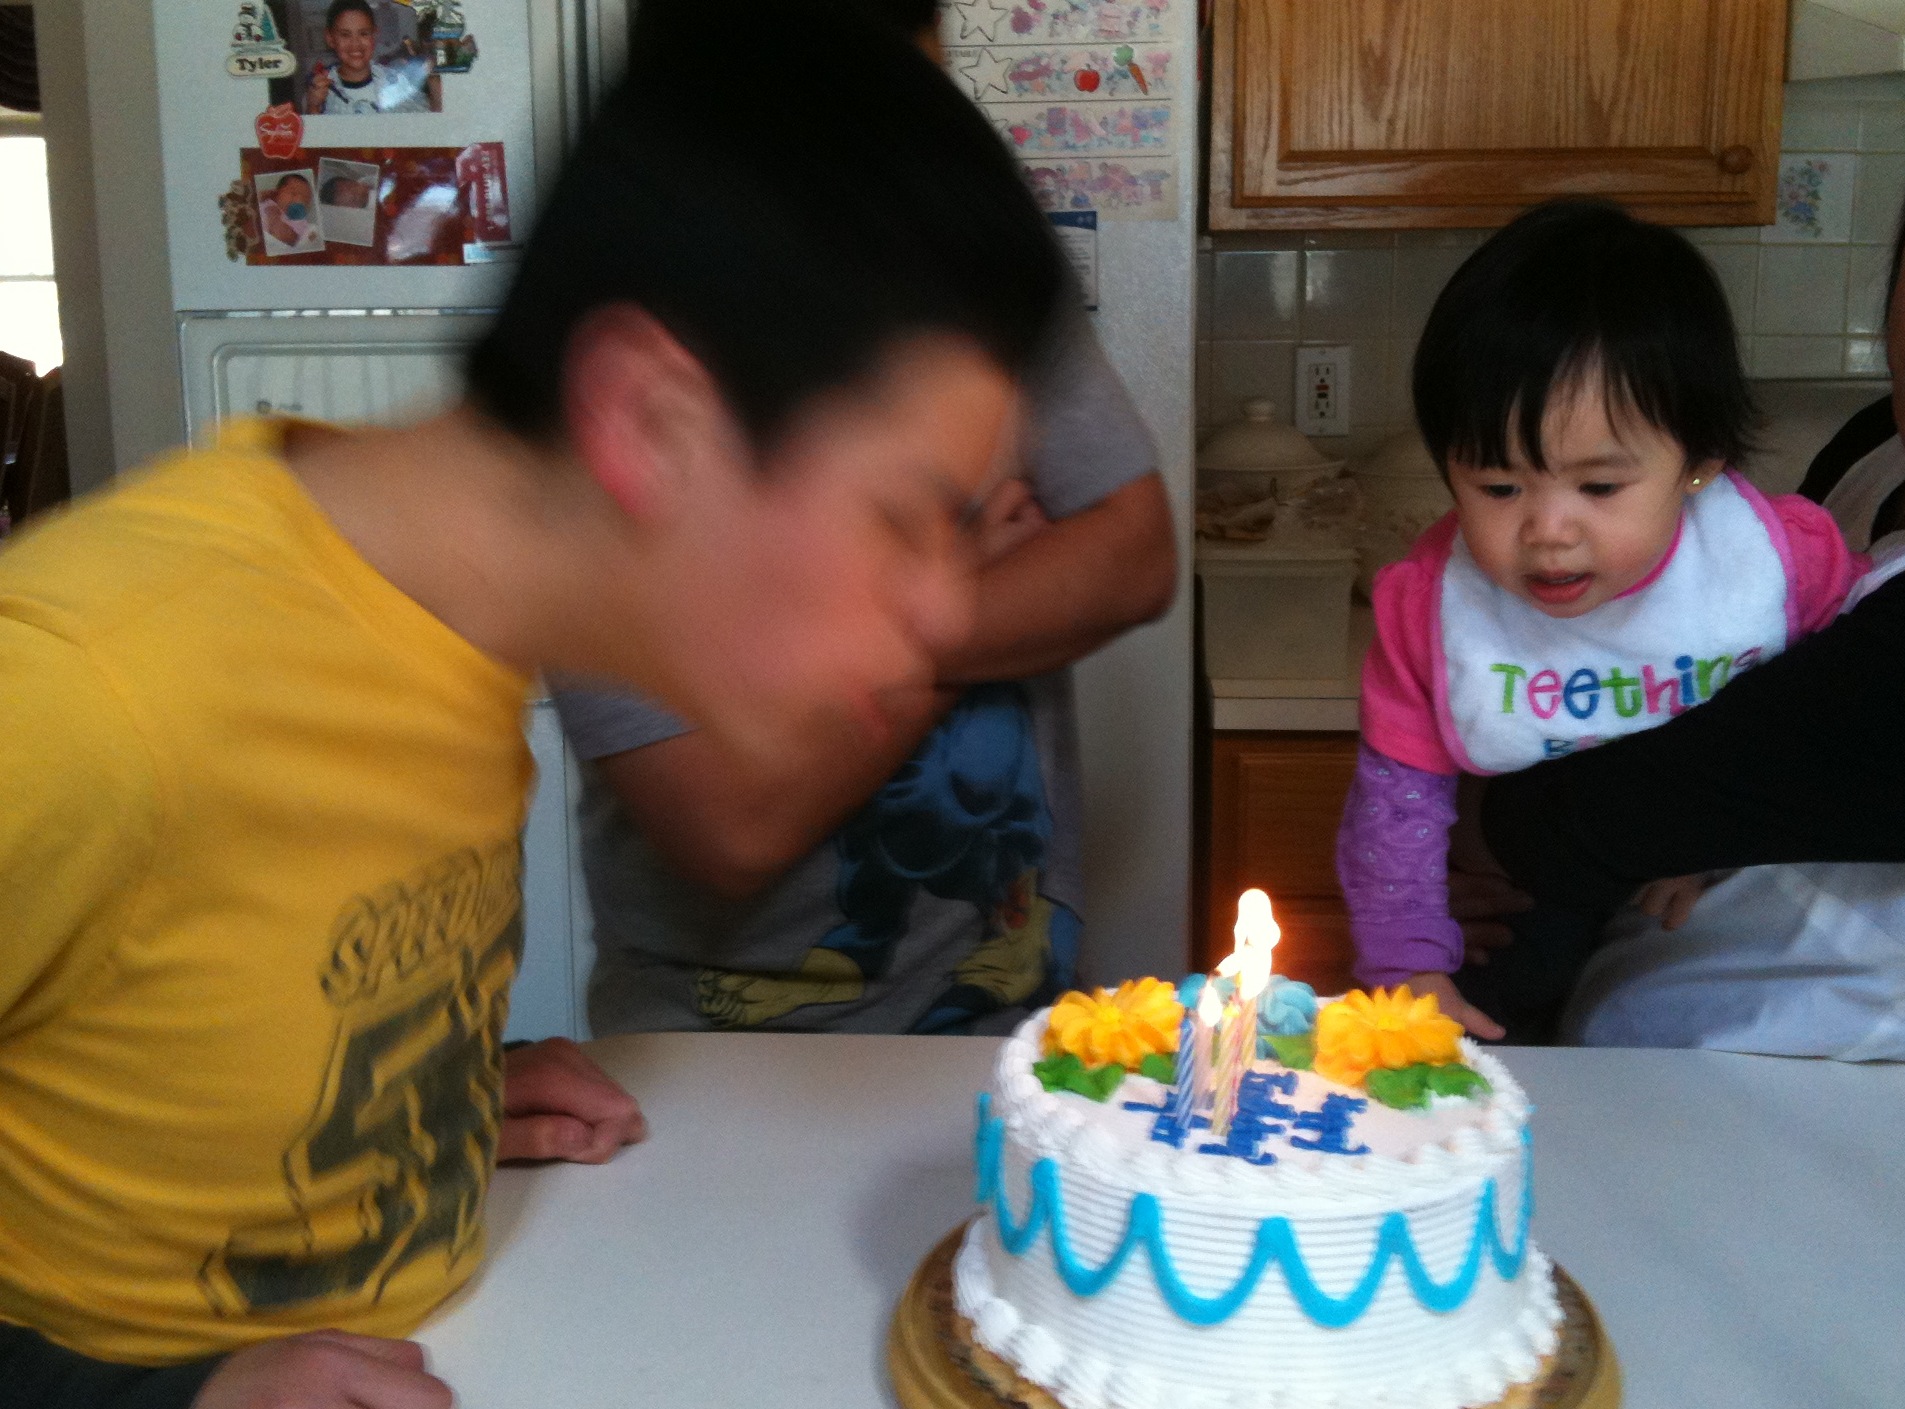 Brother blows out cake, while baby sister watches